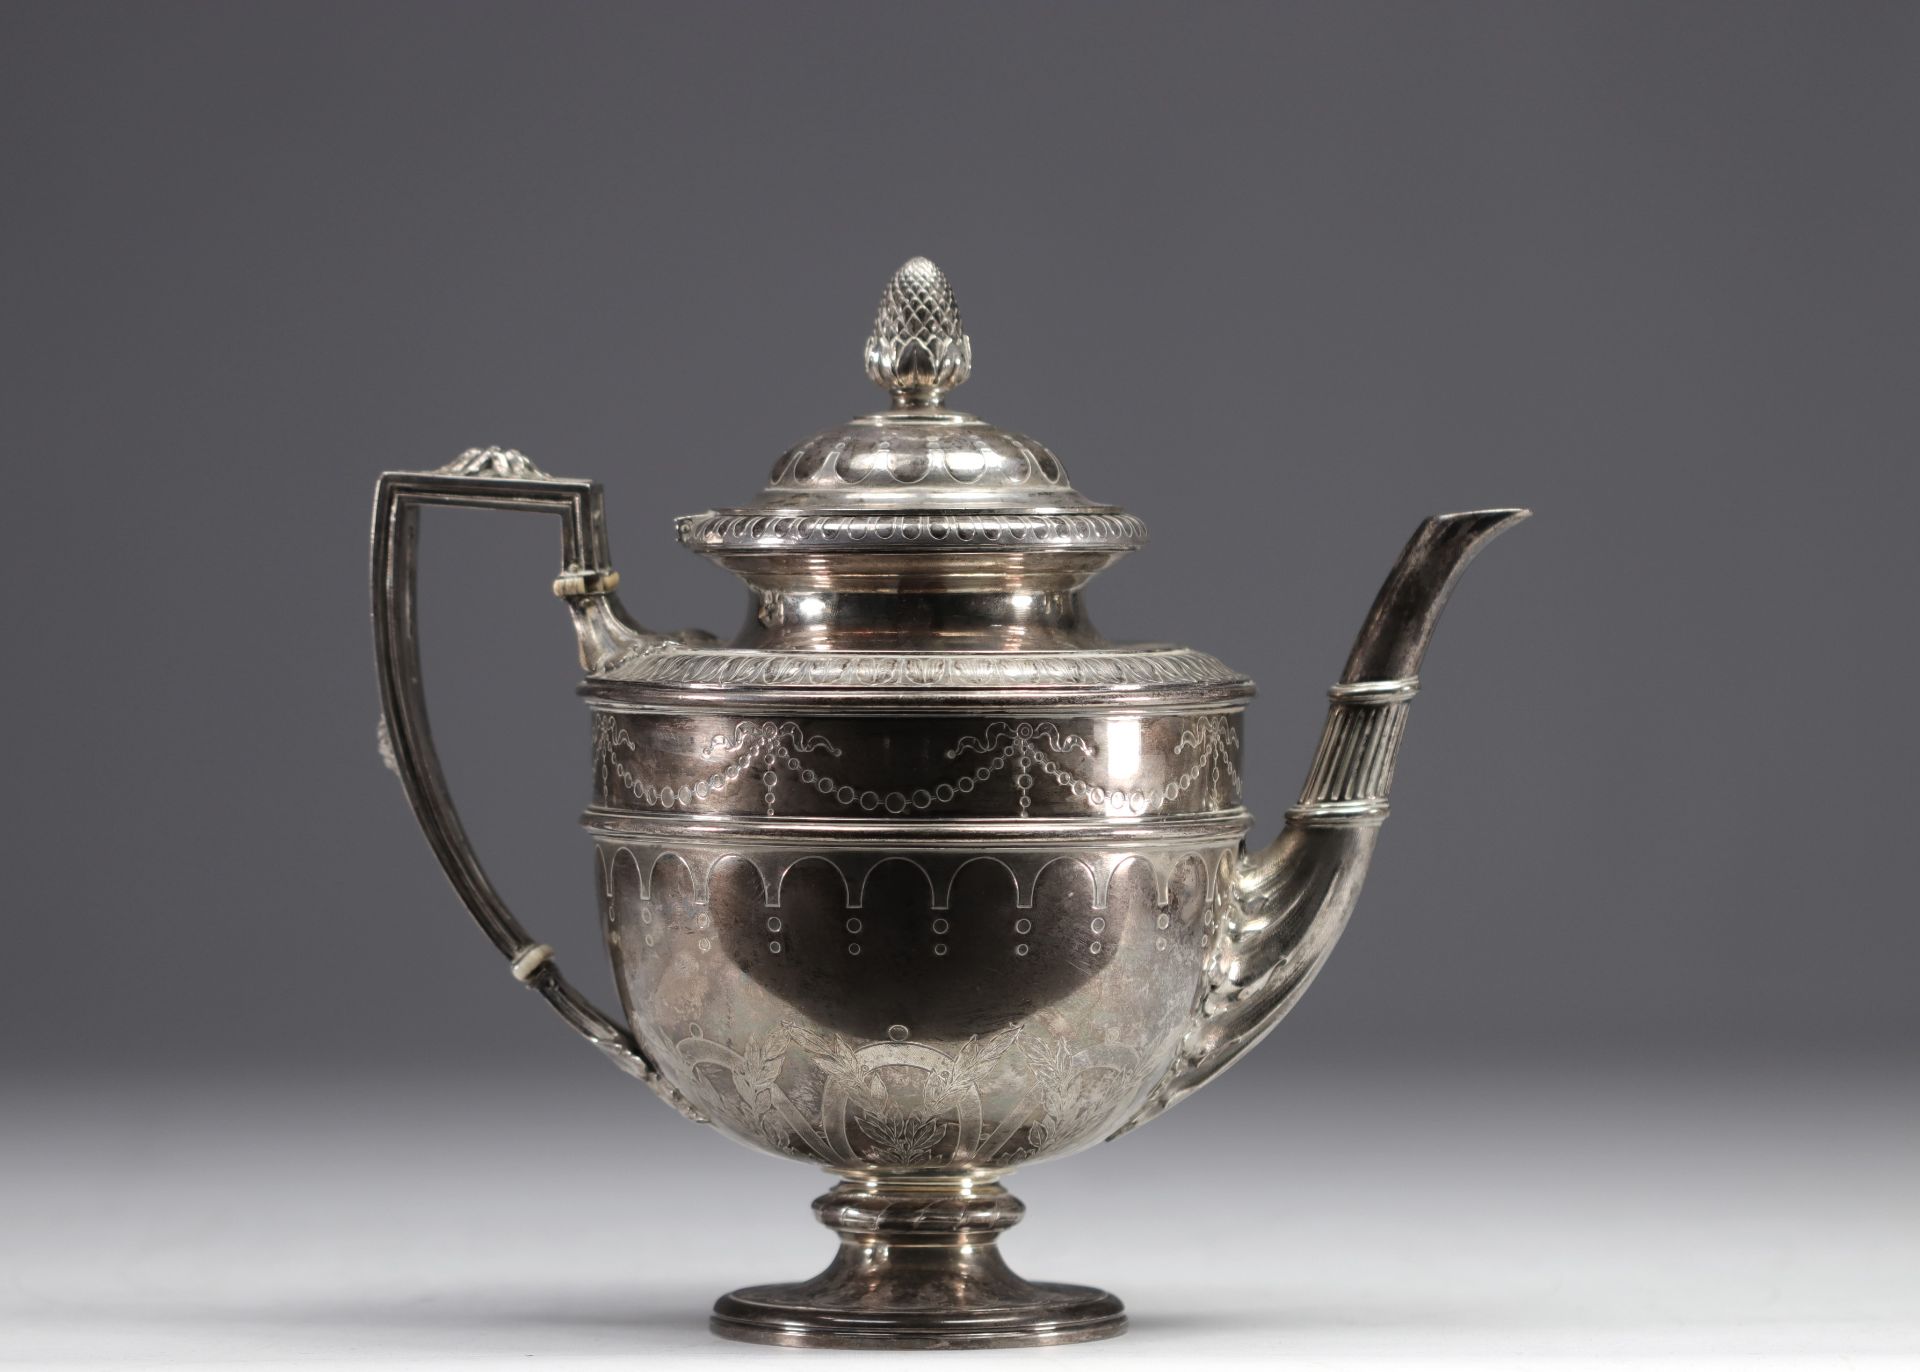 Jean-Baptiste Claude ODIOT a PARIS - Solid silver coffee service. - Image 2 of 11